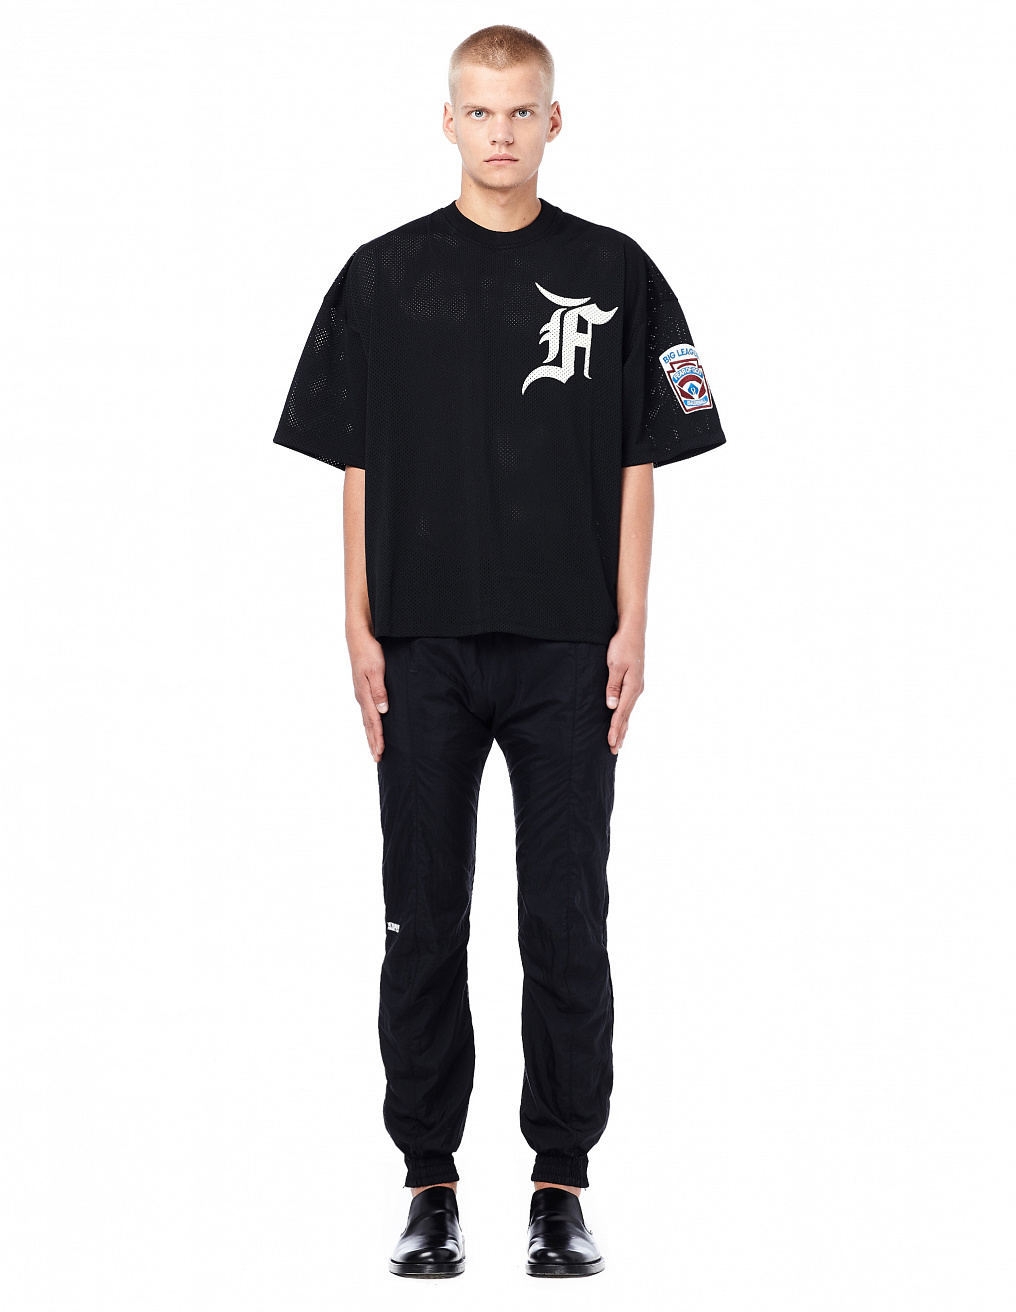 Fear of God | Mesh Batting Practice Jersey | SVMOSCOW.COM